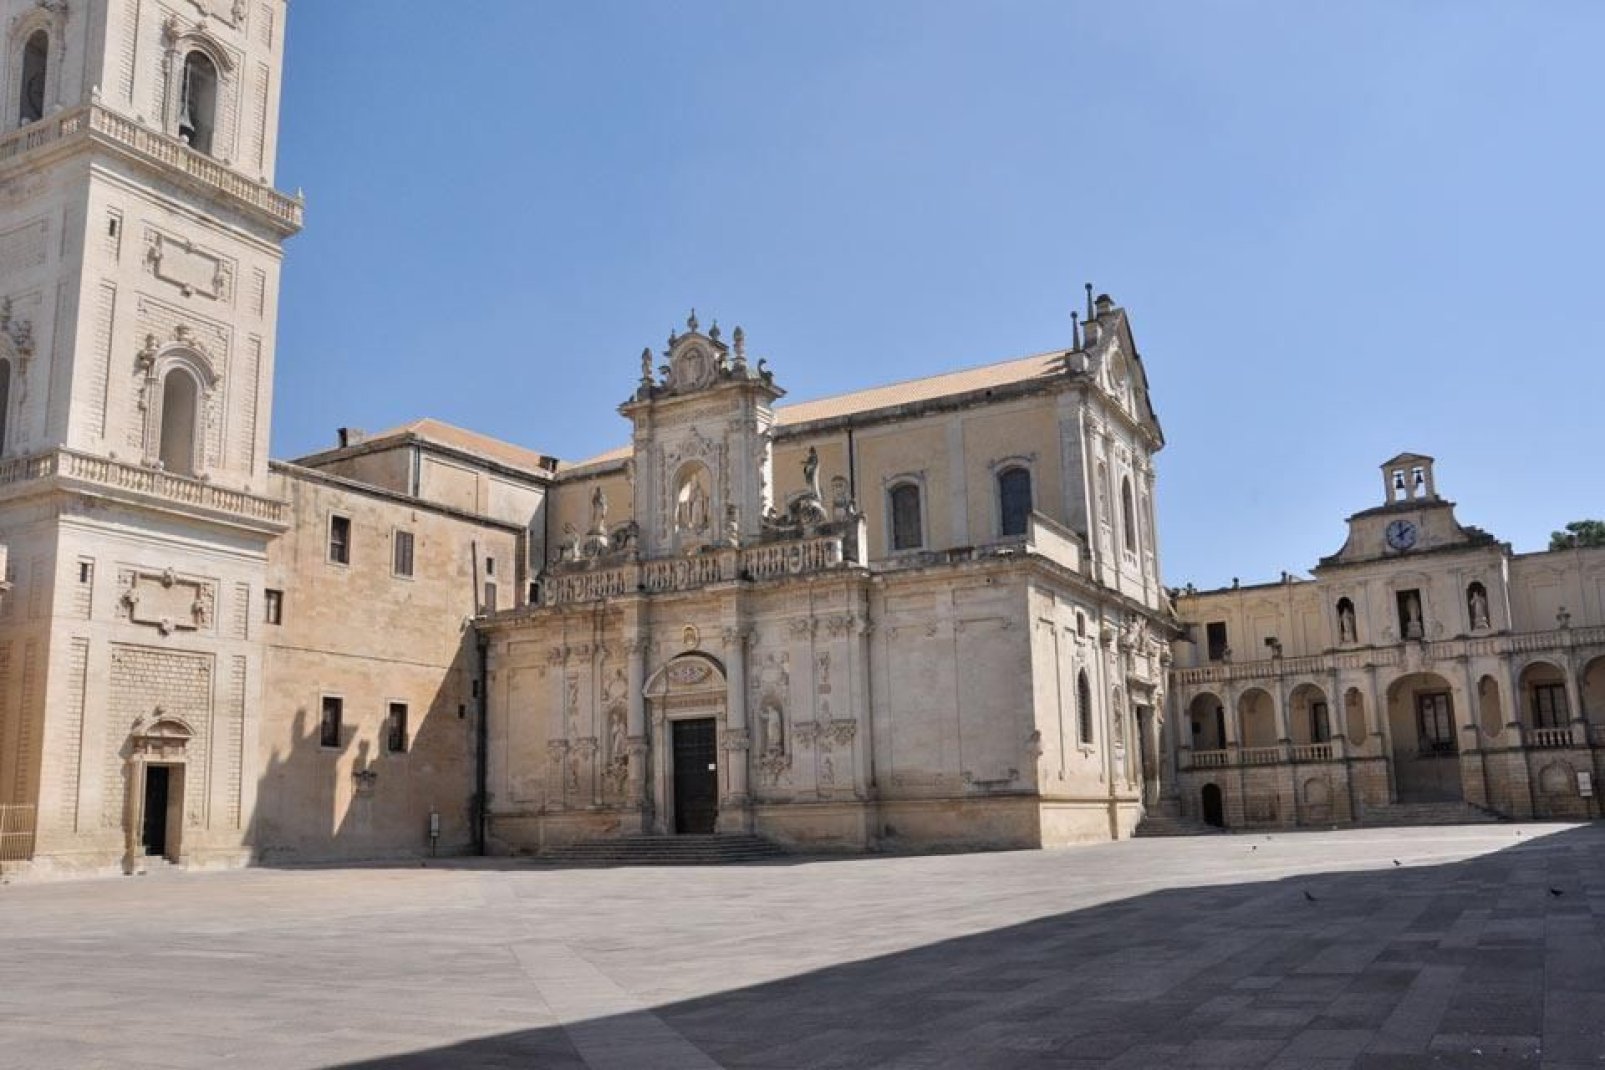 The Bishop's Palace, adjacent to the Cathedral, is the residence of the Bishop of Lecce. This palace was erected in the 15th century.